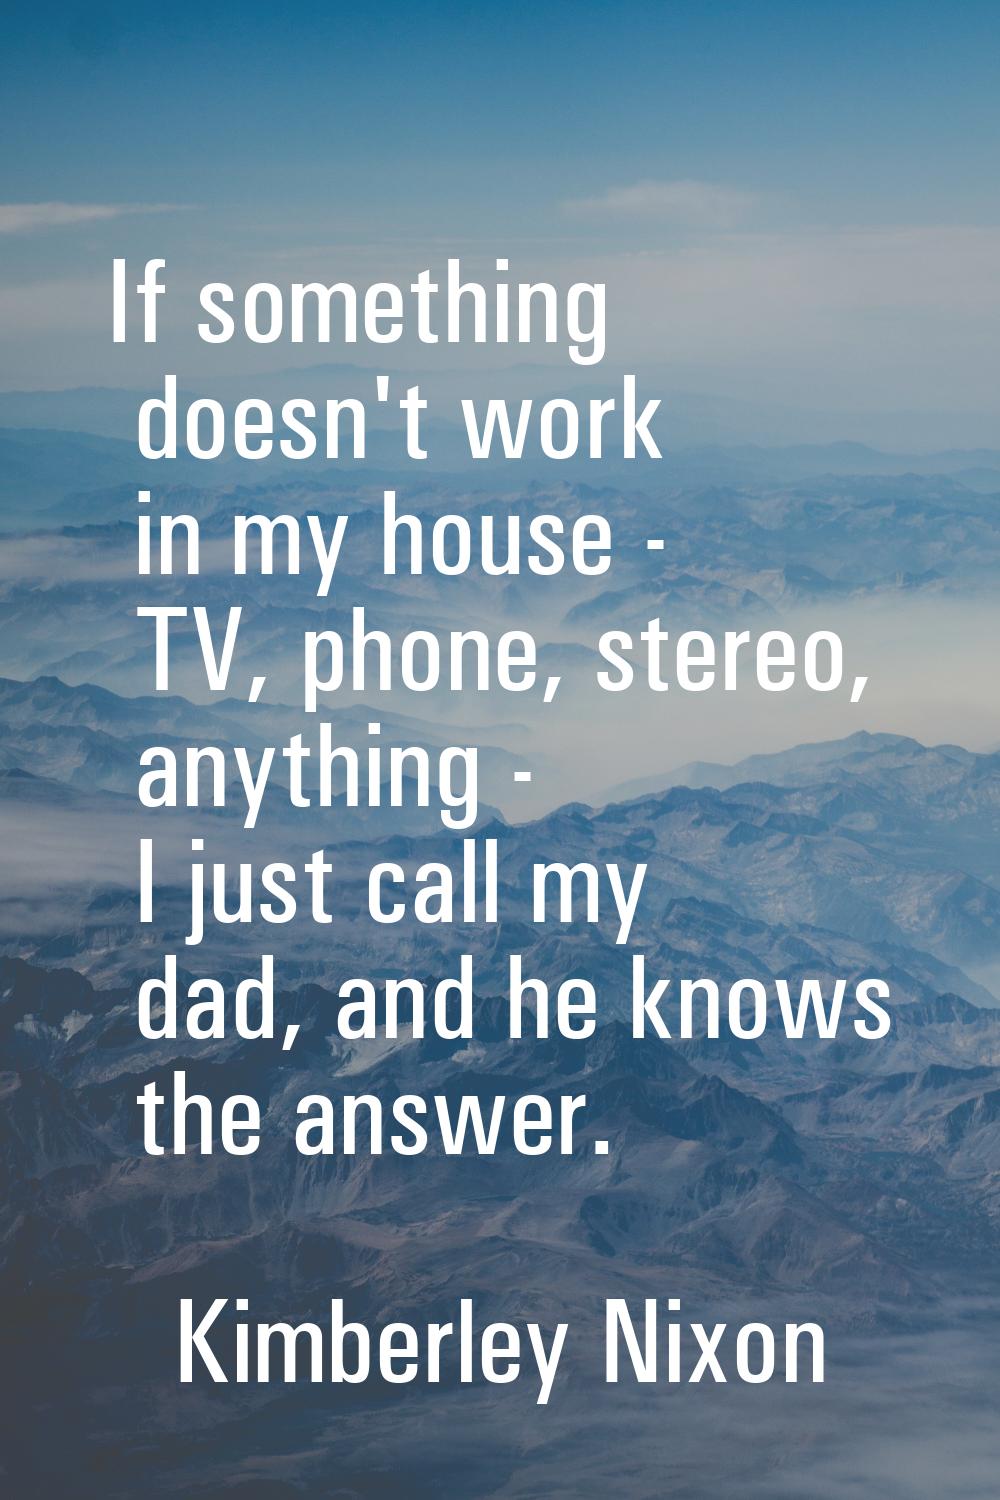 If something doesn't work in my house - TV, phone, stereo, anything - I just call my dad, and he kn